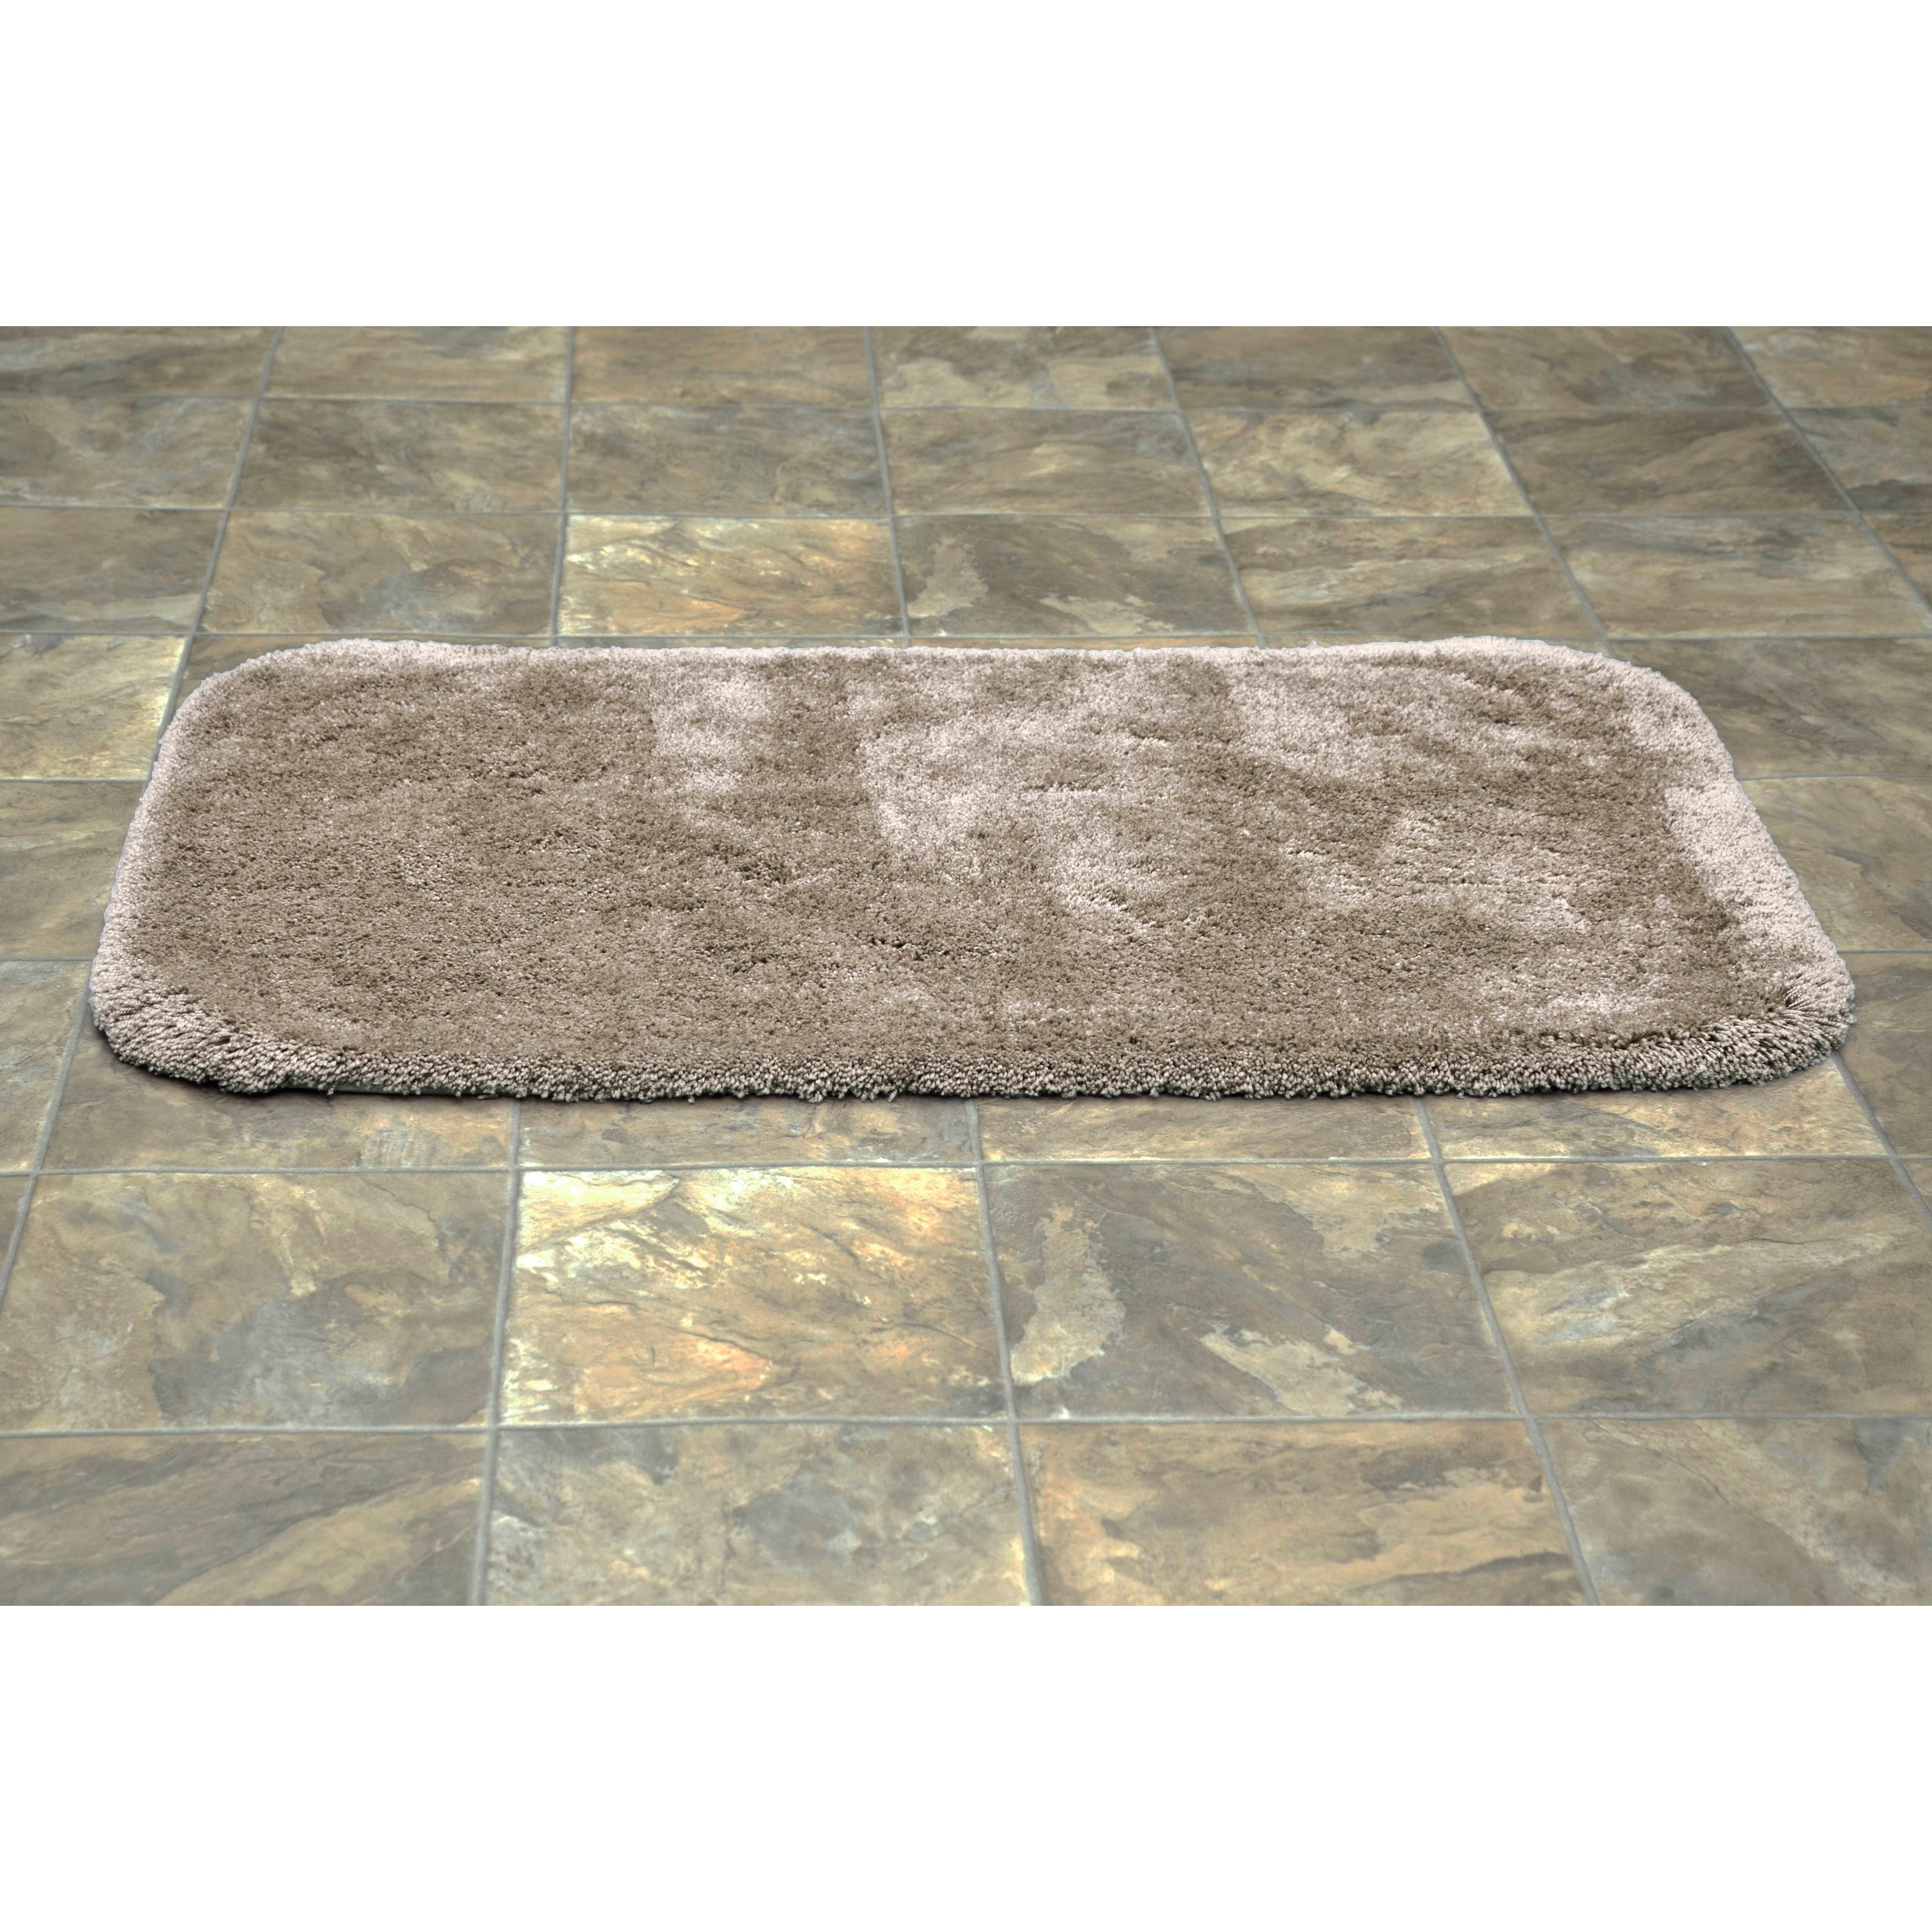 NICETOWN Taupe Bathroom Rugs and Mats Sets, Bath Mats, Slip-Resistant  Absorbent Soft Comfortable and Fluffy Chenille Toilet Rugs, Floor Mats Dry  Fast